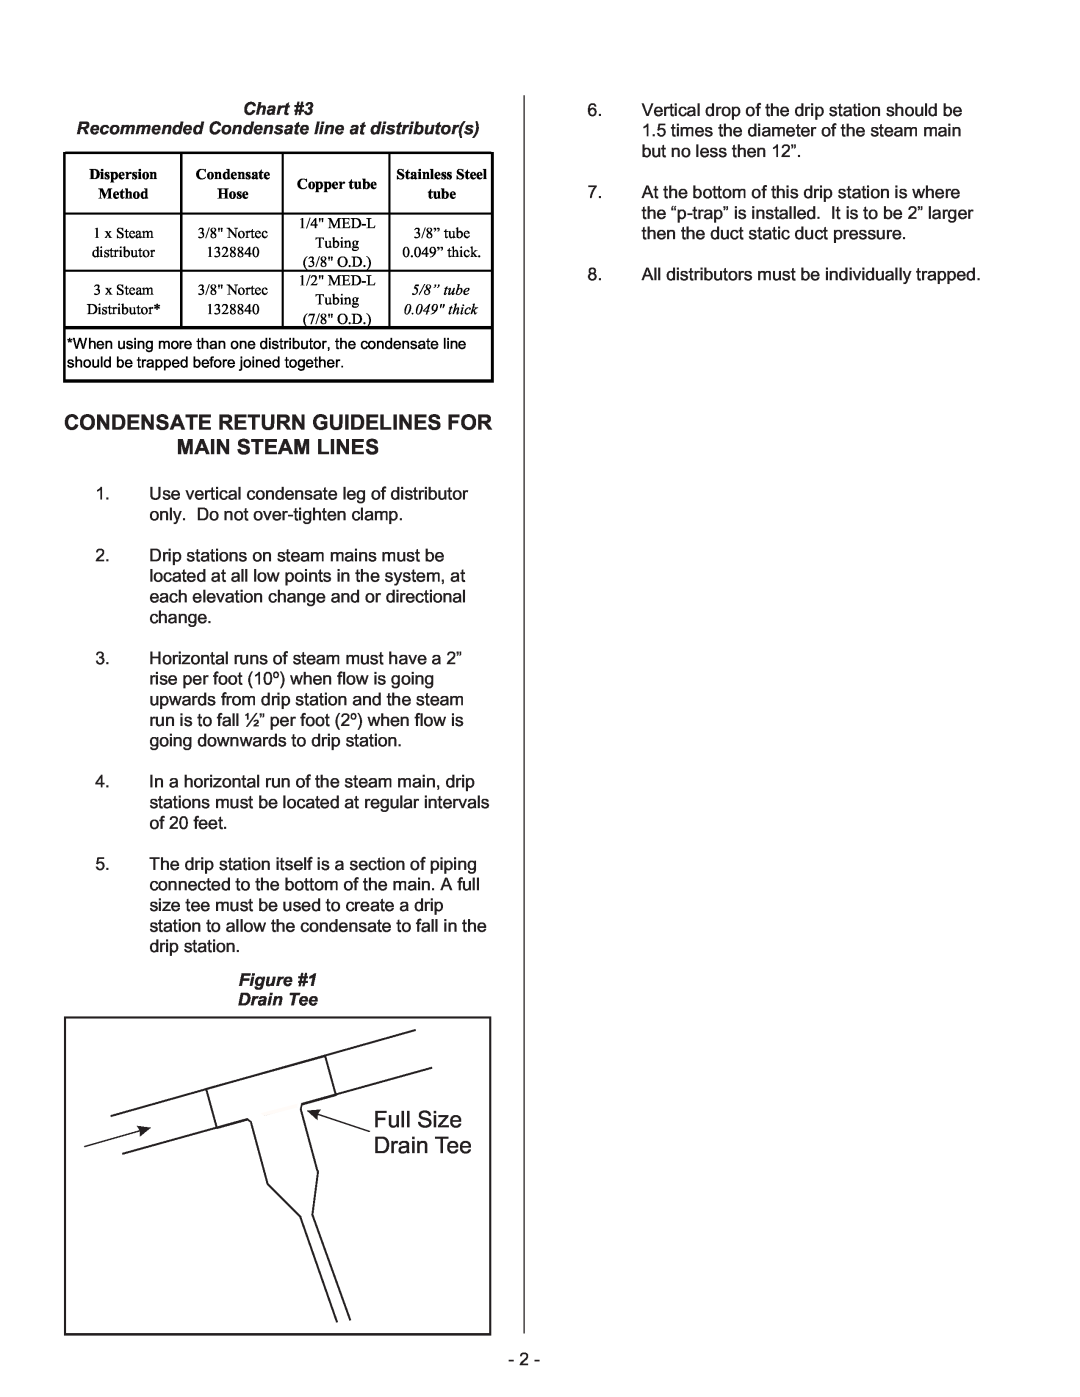 Nortec CSD, ASD, BSD Condensate Return Guidelines For Main Steam Lines, Full Size, Chart #3, Figure #1 Drain Tee 